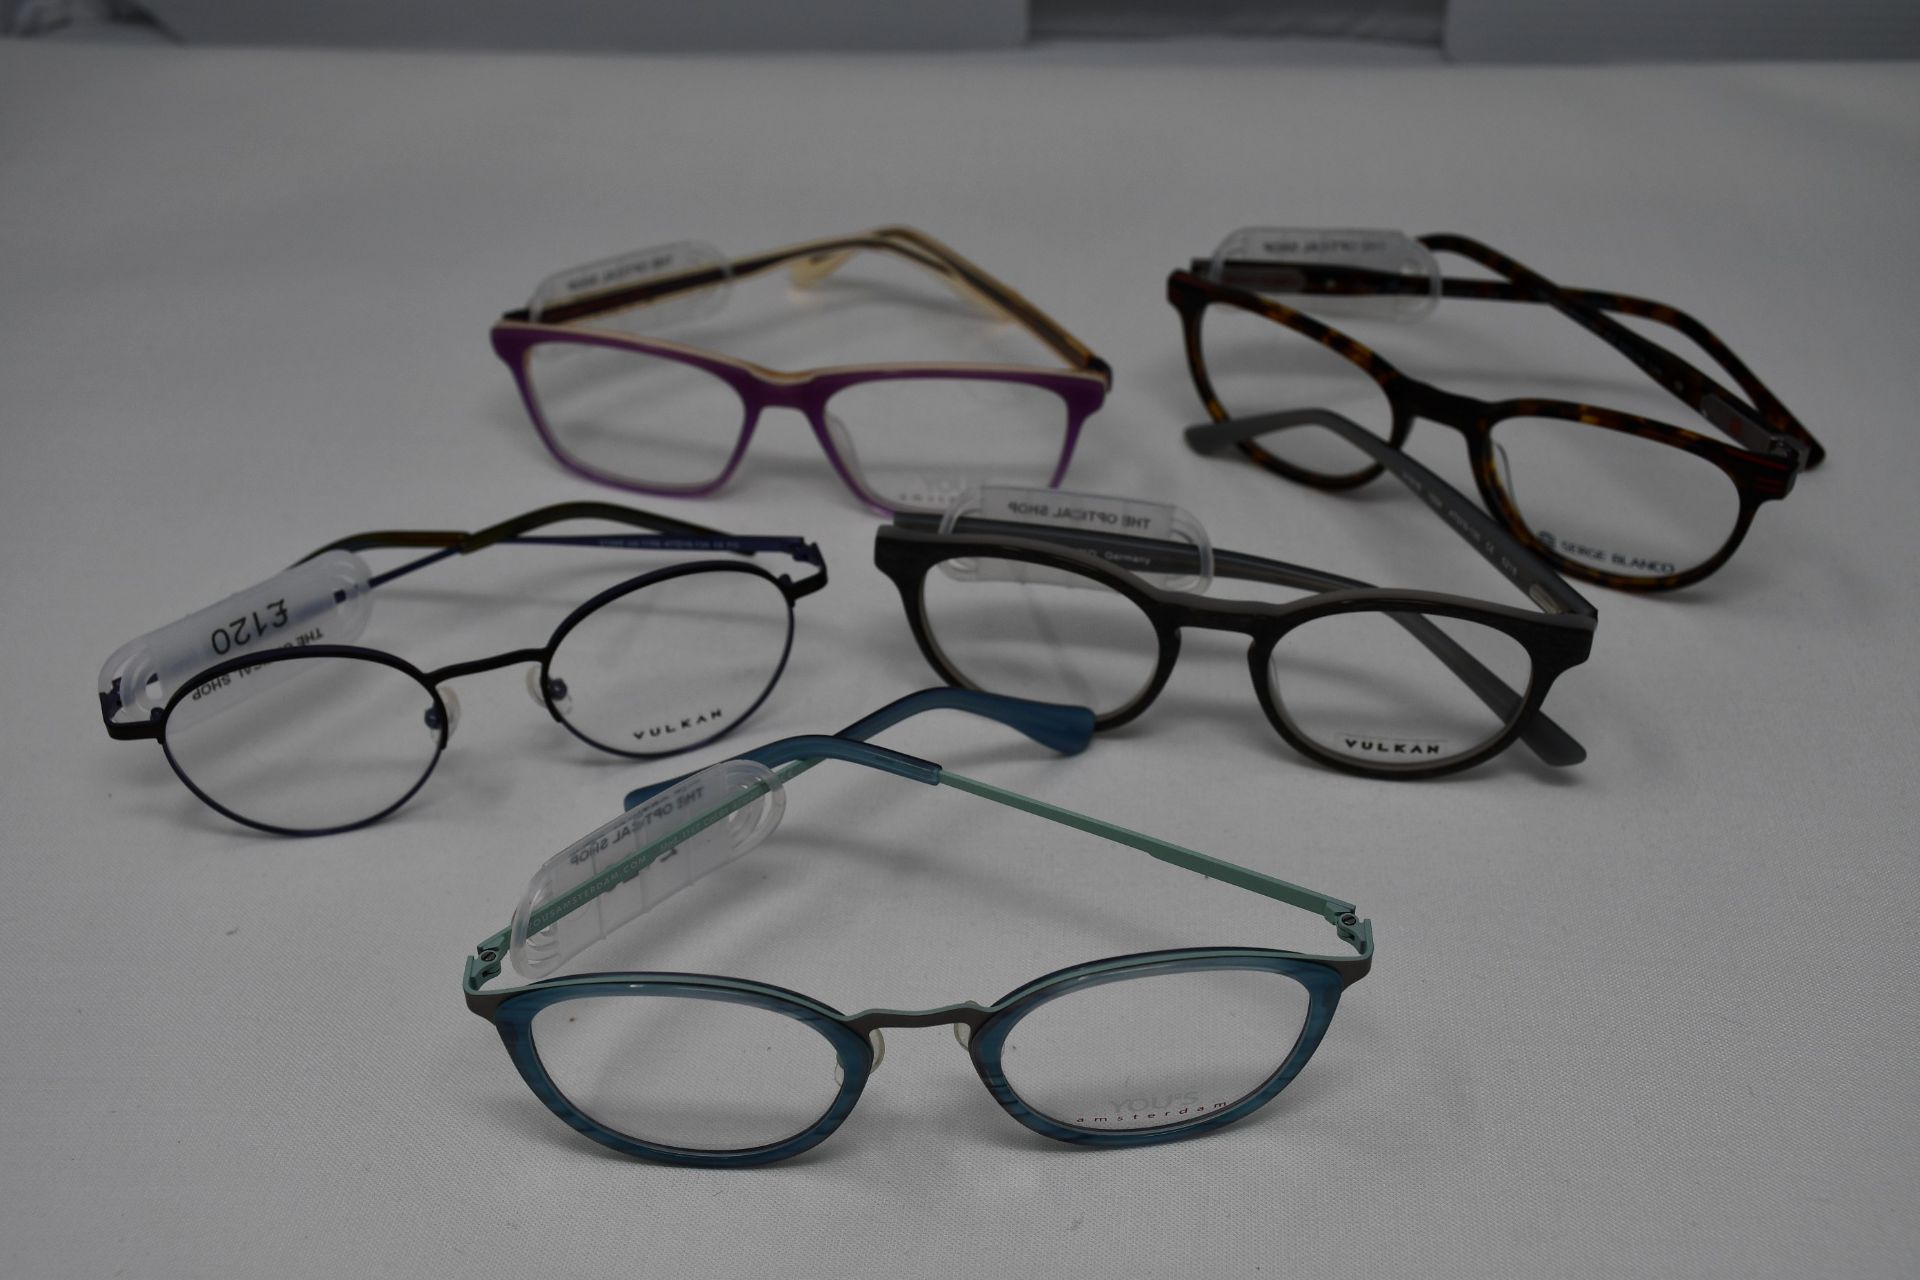 Five pairs of as new glasses frames with clear glass to include Yous, Serge Blanco and Vulkan (